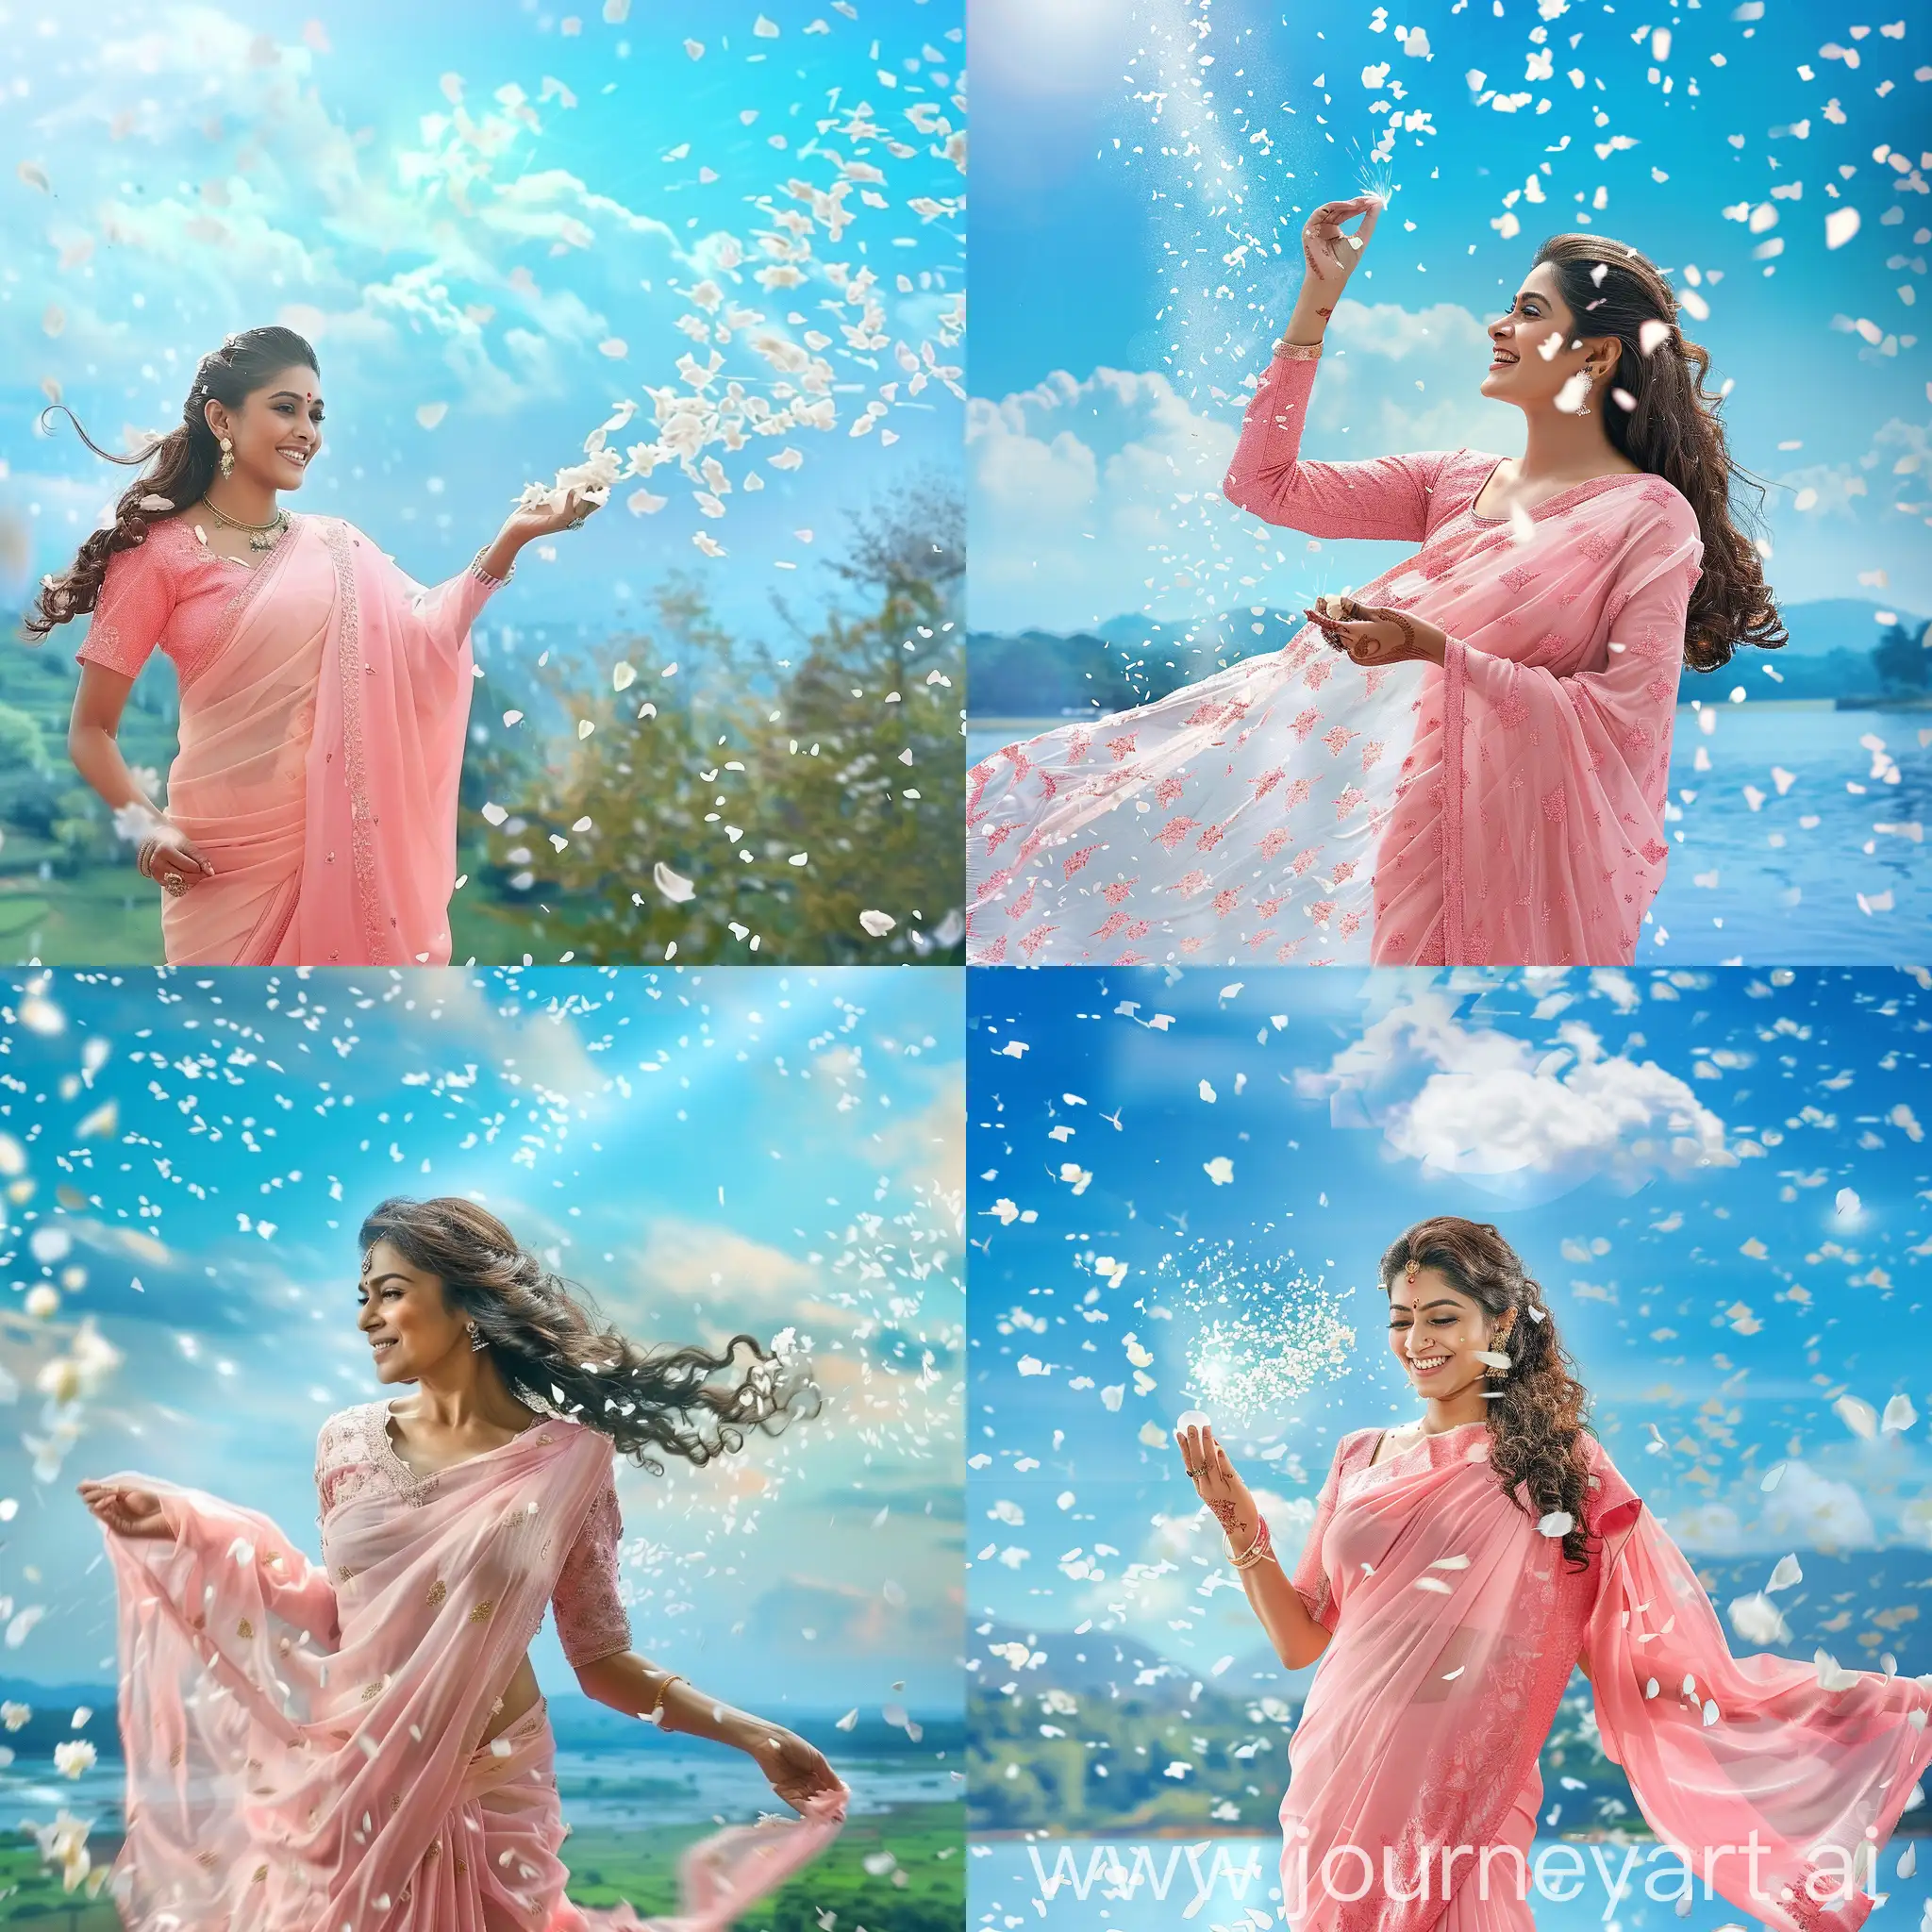 Create a stunning image of Nayanthara, wearing a pink creamy saree, beautiful picturesque landscape in the background, signaling a spark of love and excitement, the sky is blue and vibrant, she is showered with white petals from heaven, she is full of energy for having more of this treat, she is happy and tranquil, a attractive, beautiful, curvy, voluptous, half body shot, perfect composition, go